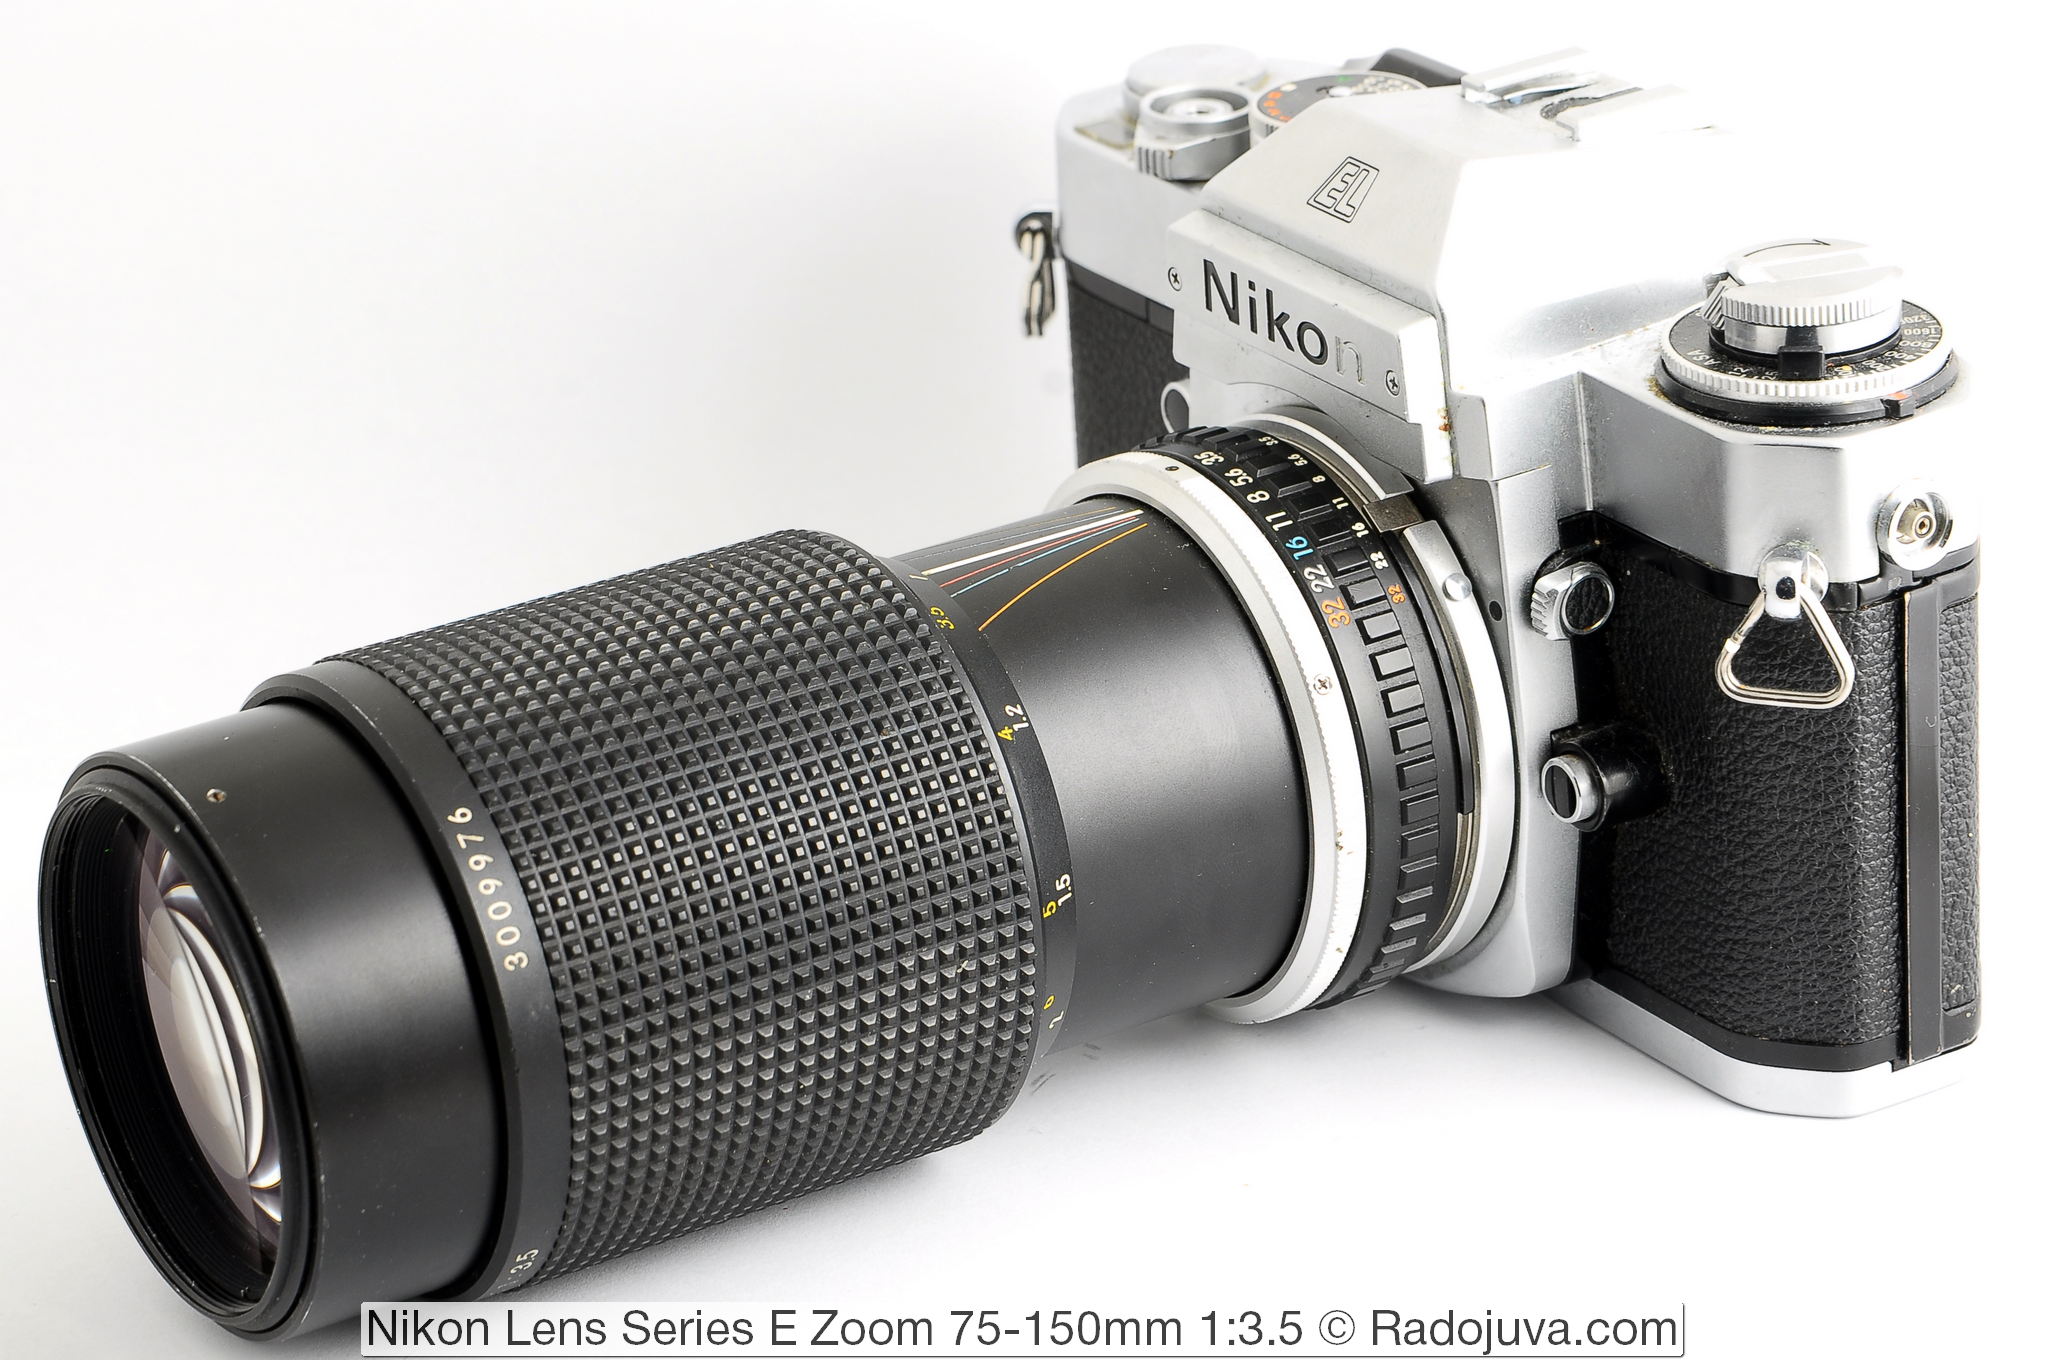 Review of the Nikon Lens Series E Zoom 75-150mm 1: 3.5 (MKII) | Happy